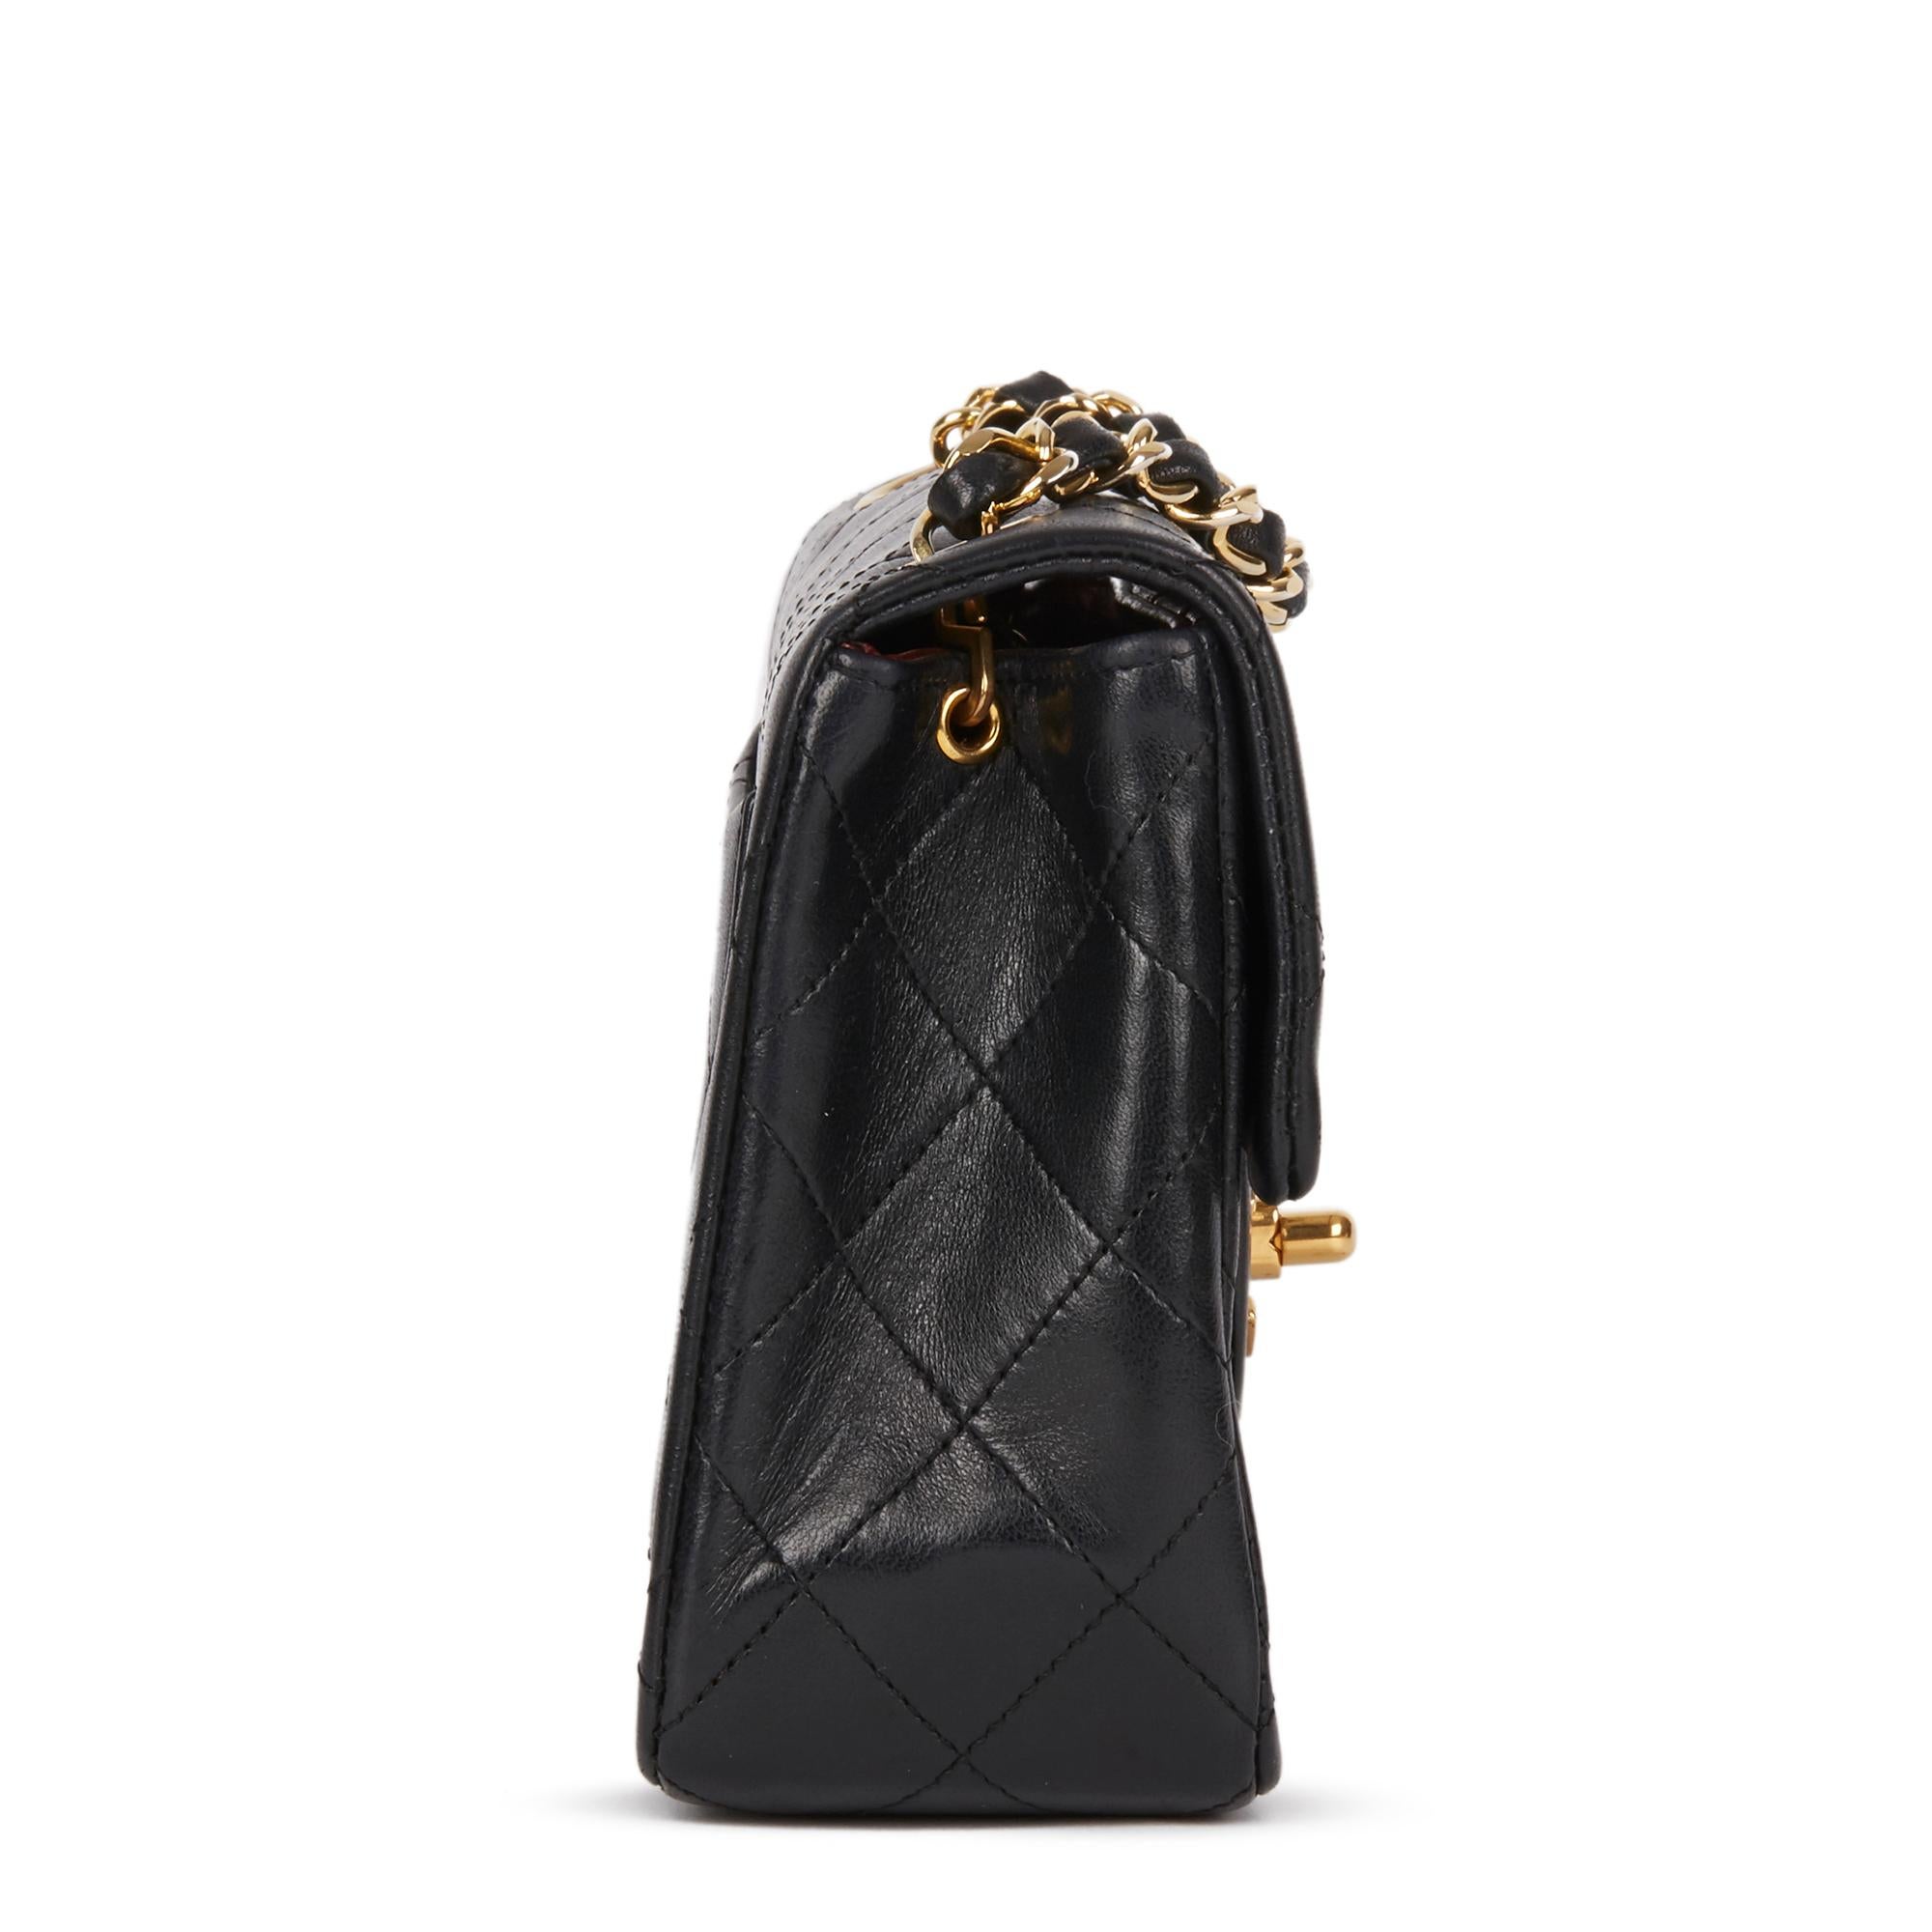 CHANEL
Black Quilted Lambskin Vintage Mini Flap Bag

Xupes Reference: HB2942
Serial Number: 1167782
Age (Circa): 1989
Accompanied By: Chanel Dust Bag, Box
Authenticity Details: Serial Sticker (Made in France)
Gender: Ladies
Type: Shoulder,